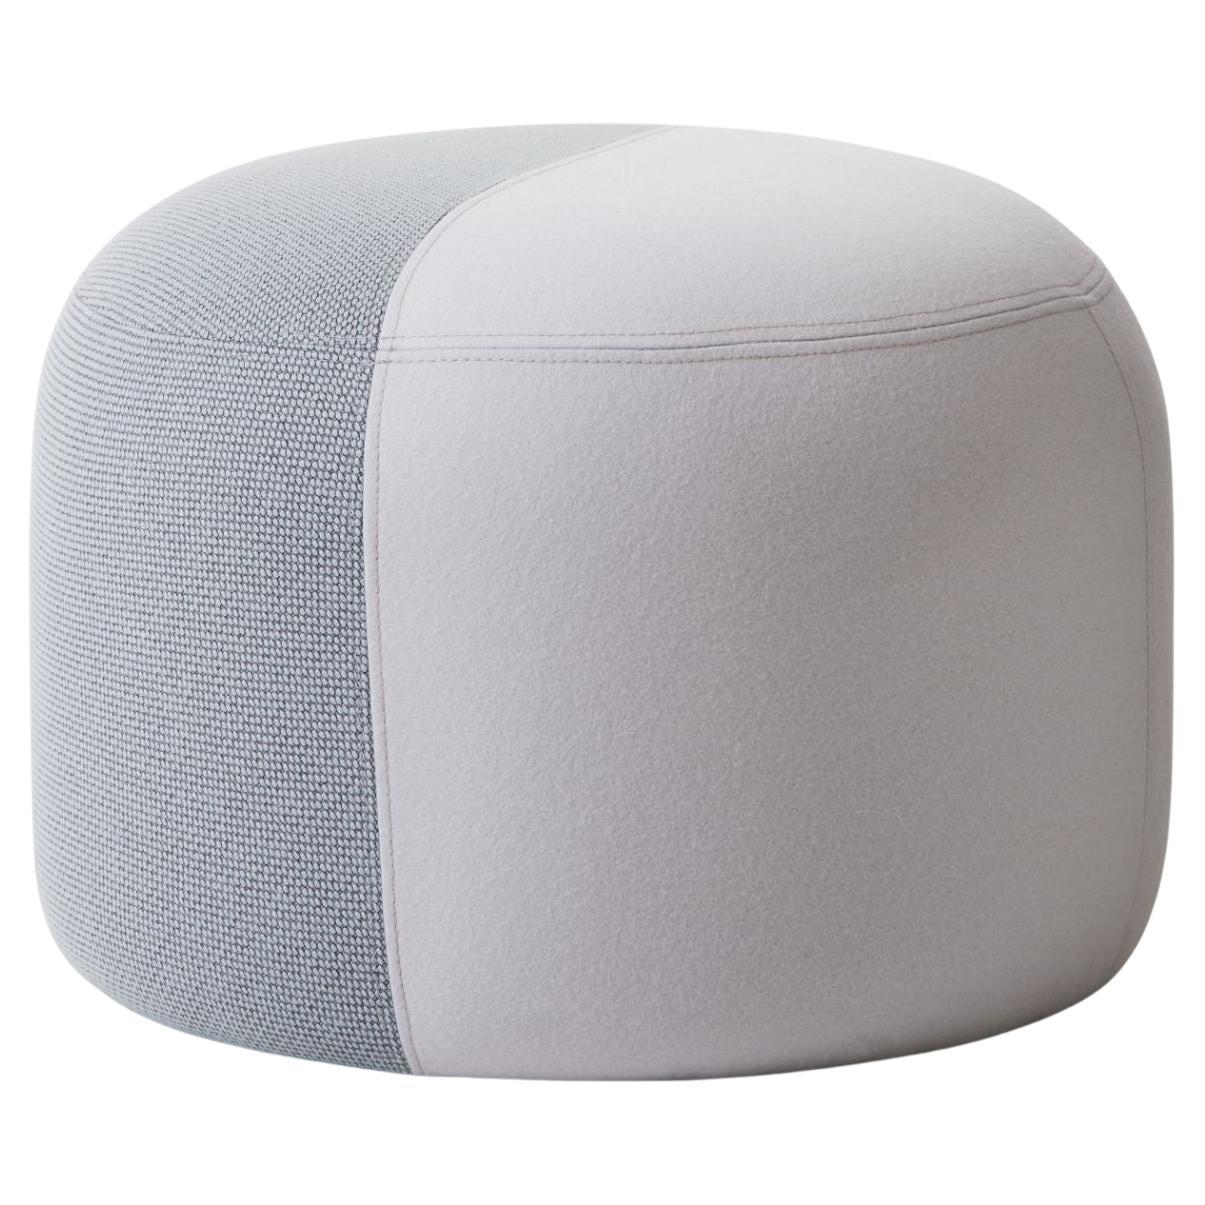 Dainty Pouf Minty Grey, Cloudy White by Warm Nordic For Sale